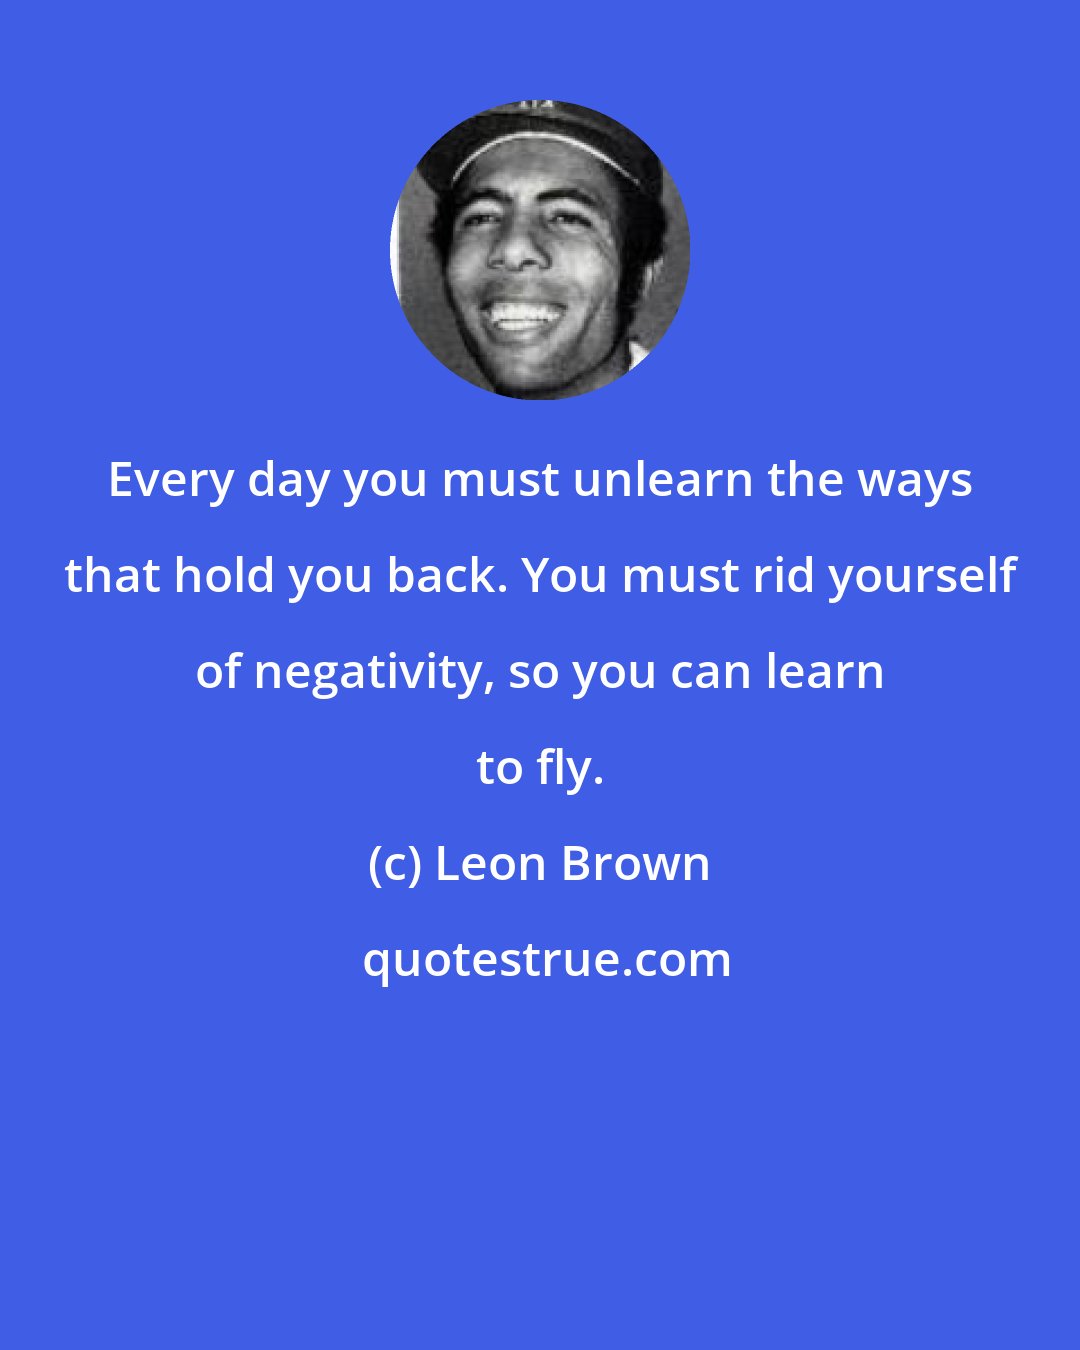 Leon Brown: Every day you must unlearn the ways that hold you back. You must rid yourself of negativity, so you can learn to fly.